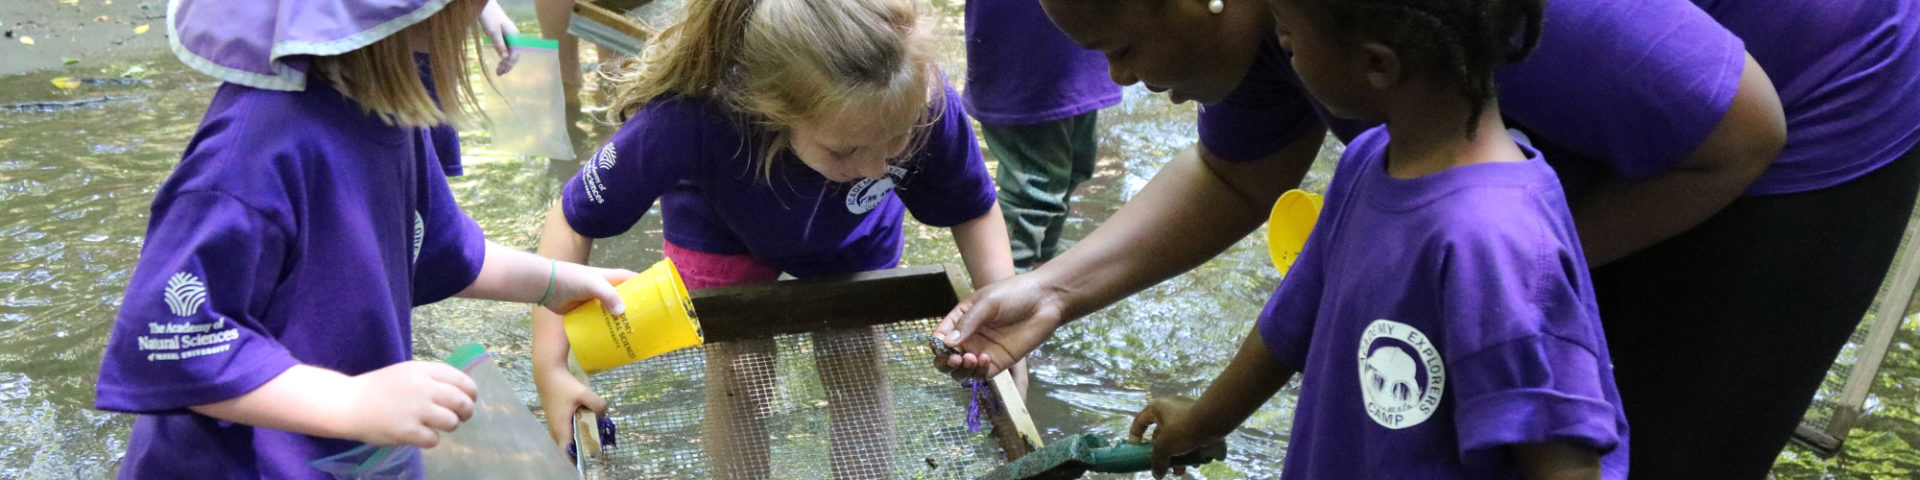 Academy of Natural Sciences summer campers search for fossils in a stream.